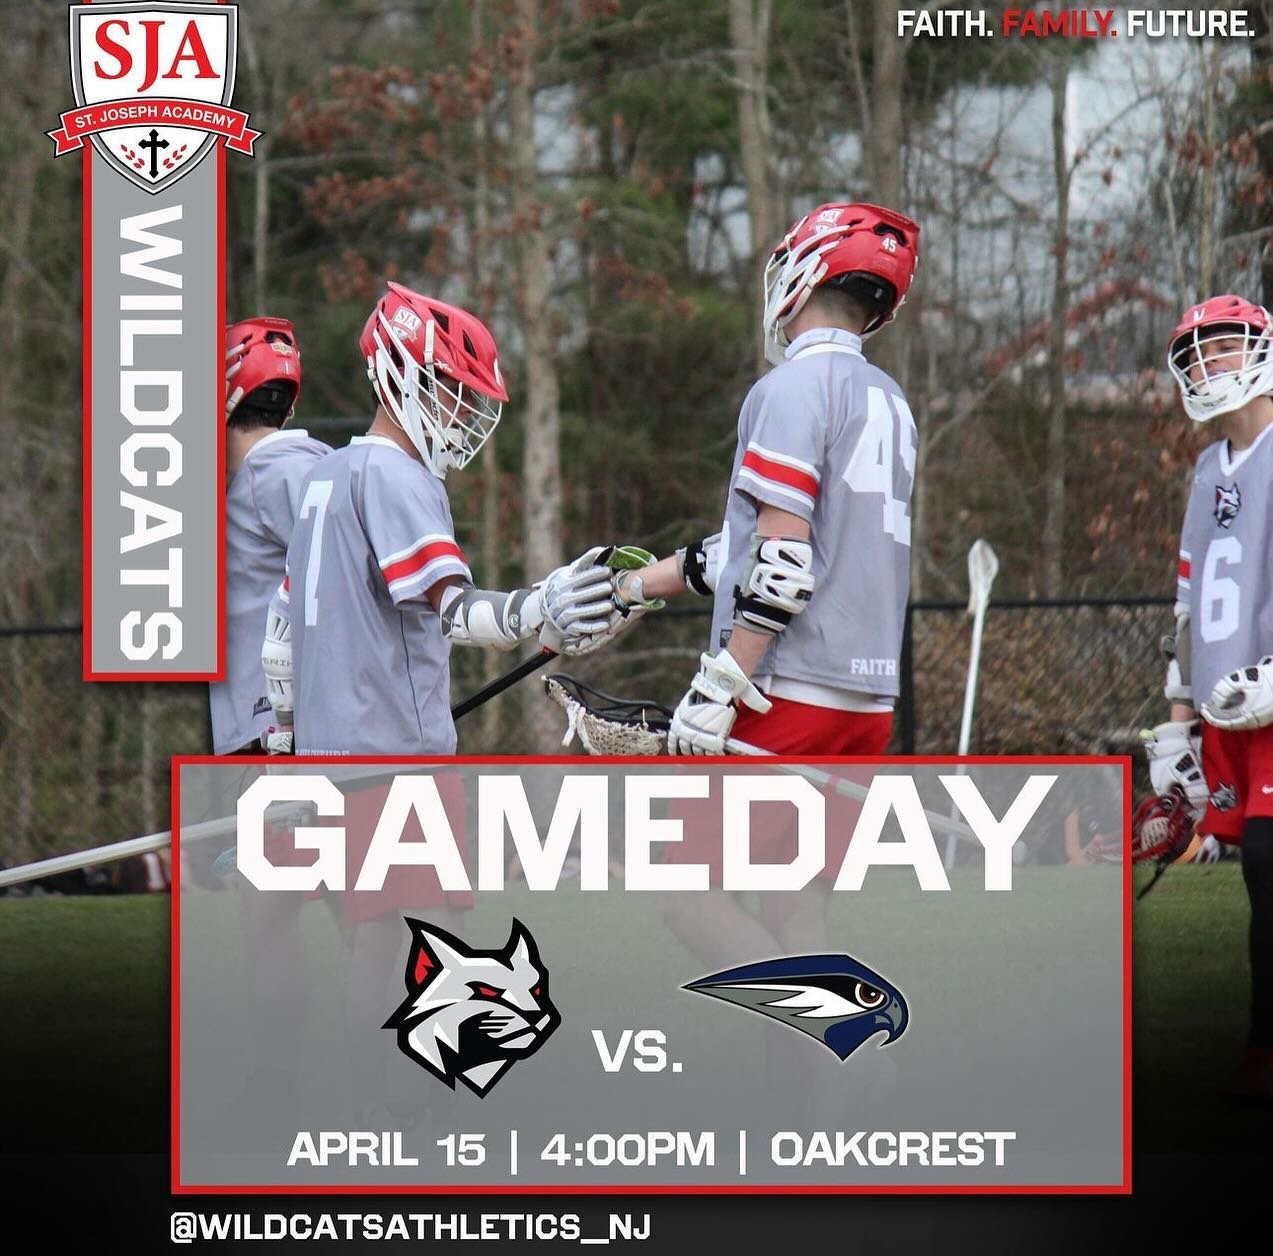 IT&rsquo;S GAMEDAY!!!

Boys Lacrosse travels to Oakcrest @ 4:00

Girls Lacrosse takes on Winslow at Home @ 4:00

Baseball takes on Lower Cape May at Home @ 4:00

#FaithFamilyFuture